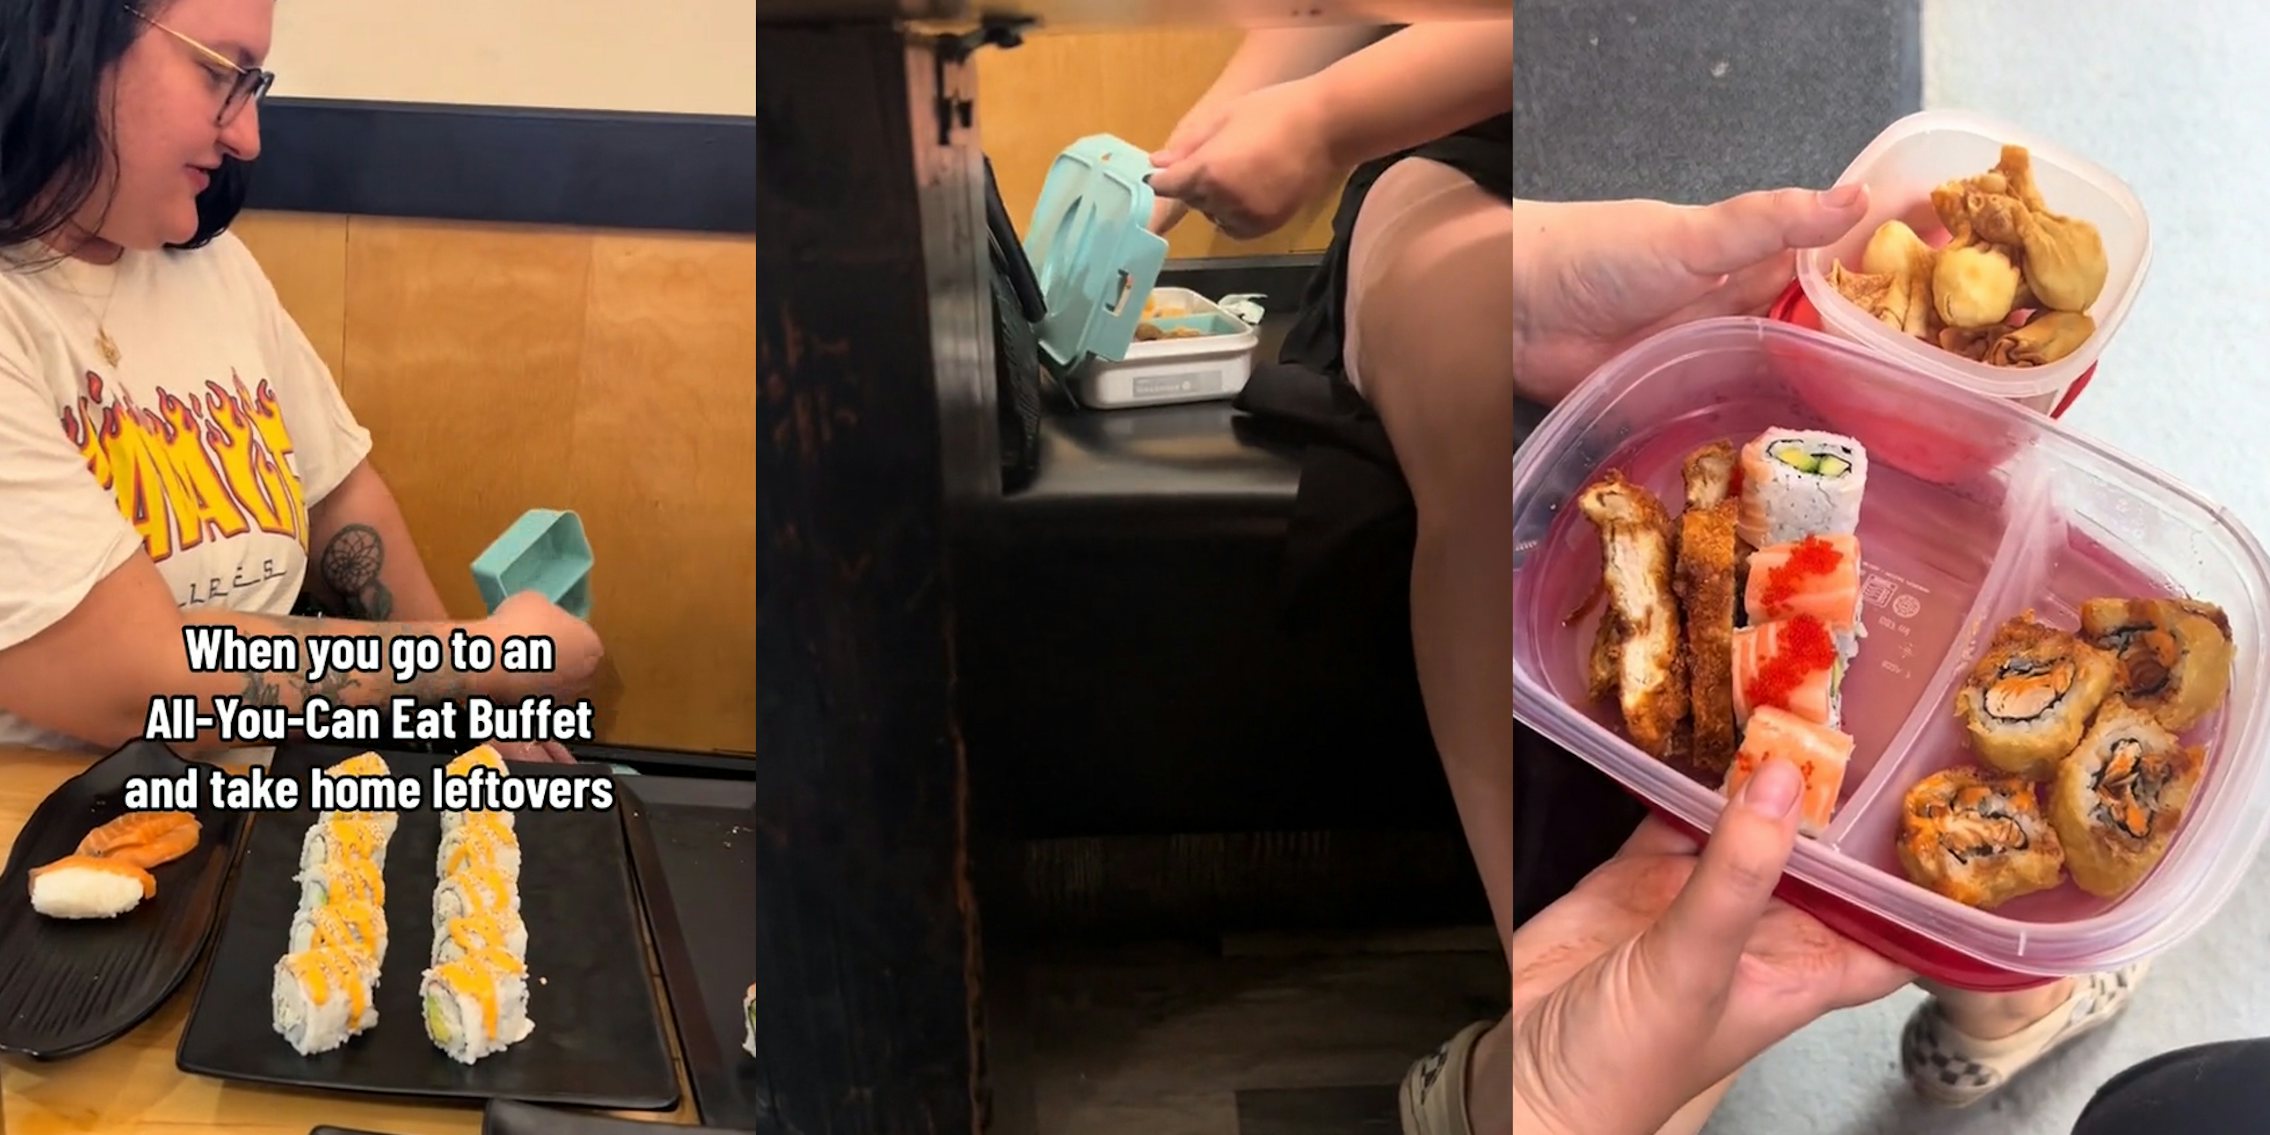 woman at booth in buffet with caption 'When you go to an All-You-Can-Eat Buffet and take home leftovers' (l) woman placing food inside Tupperware container on restaurant booth seat (c) woman holding Tupperware containers of buffet food outside (r)